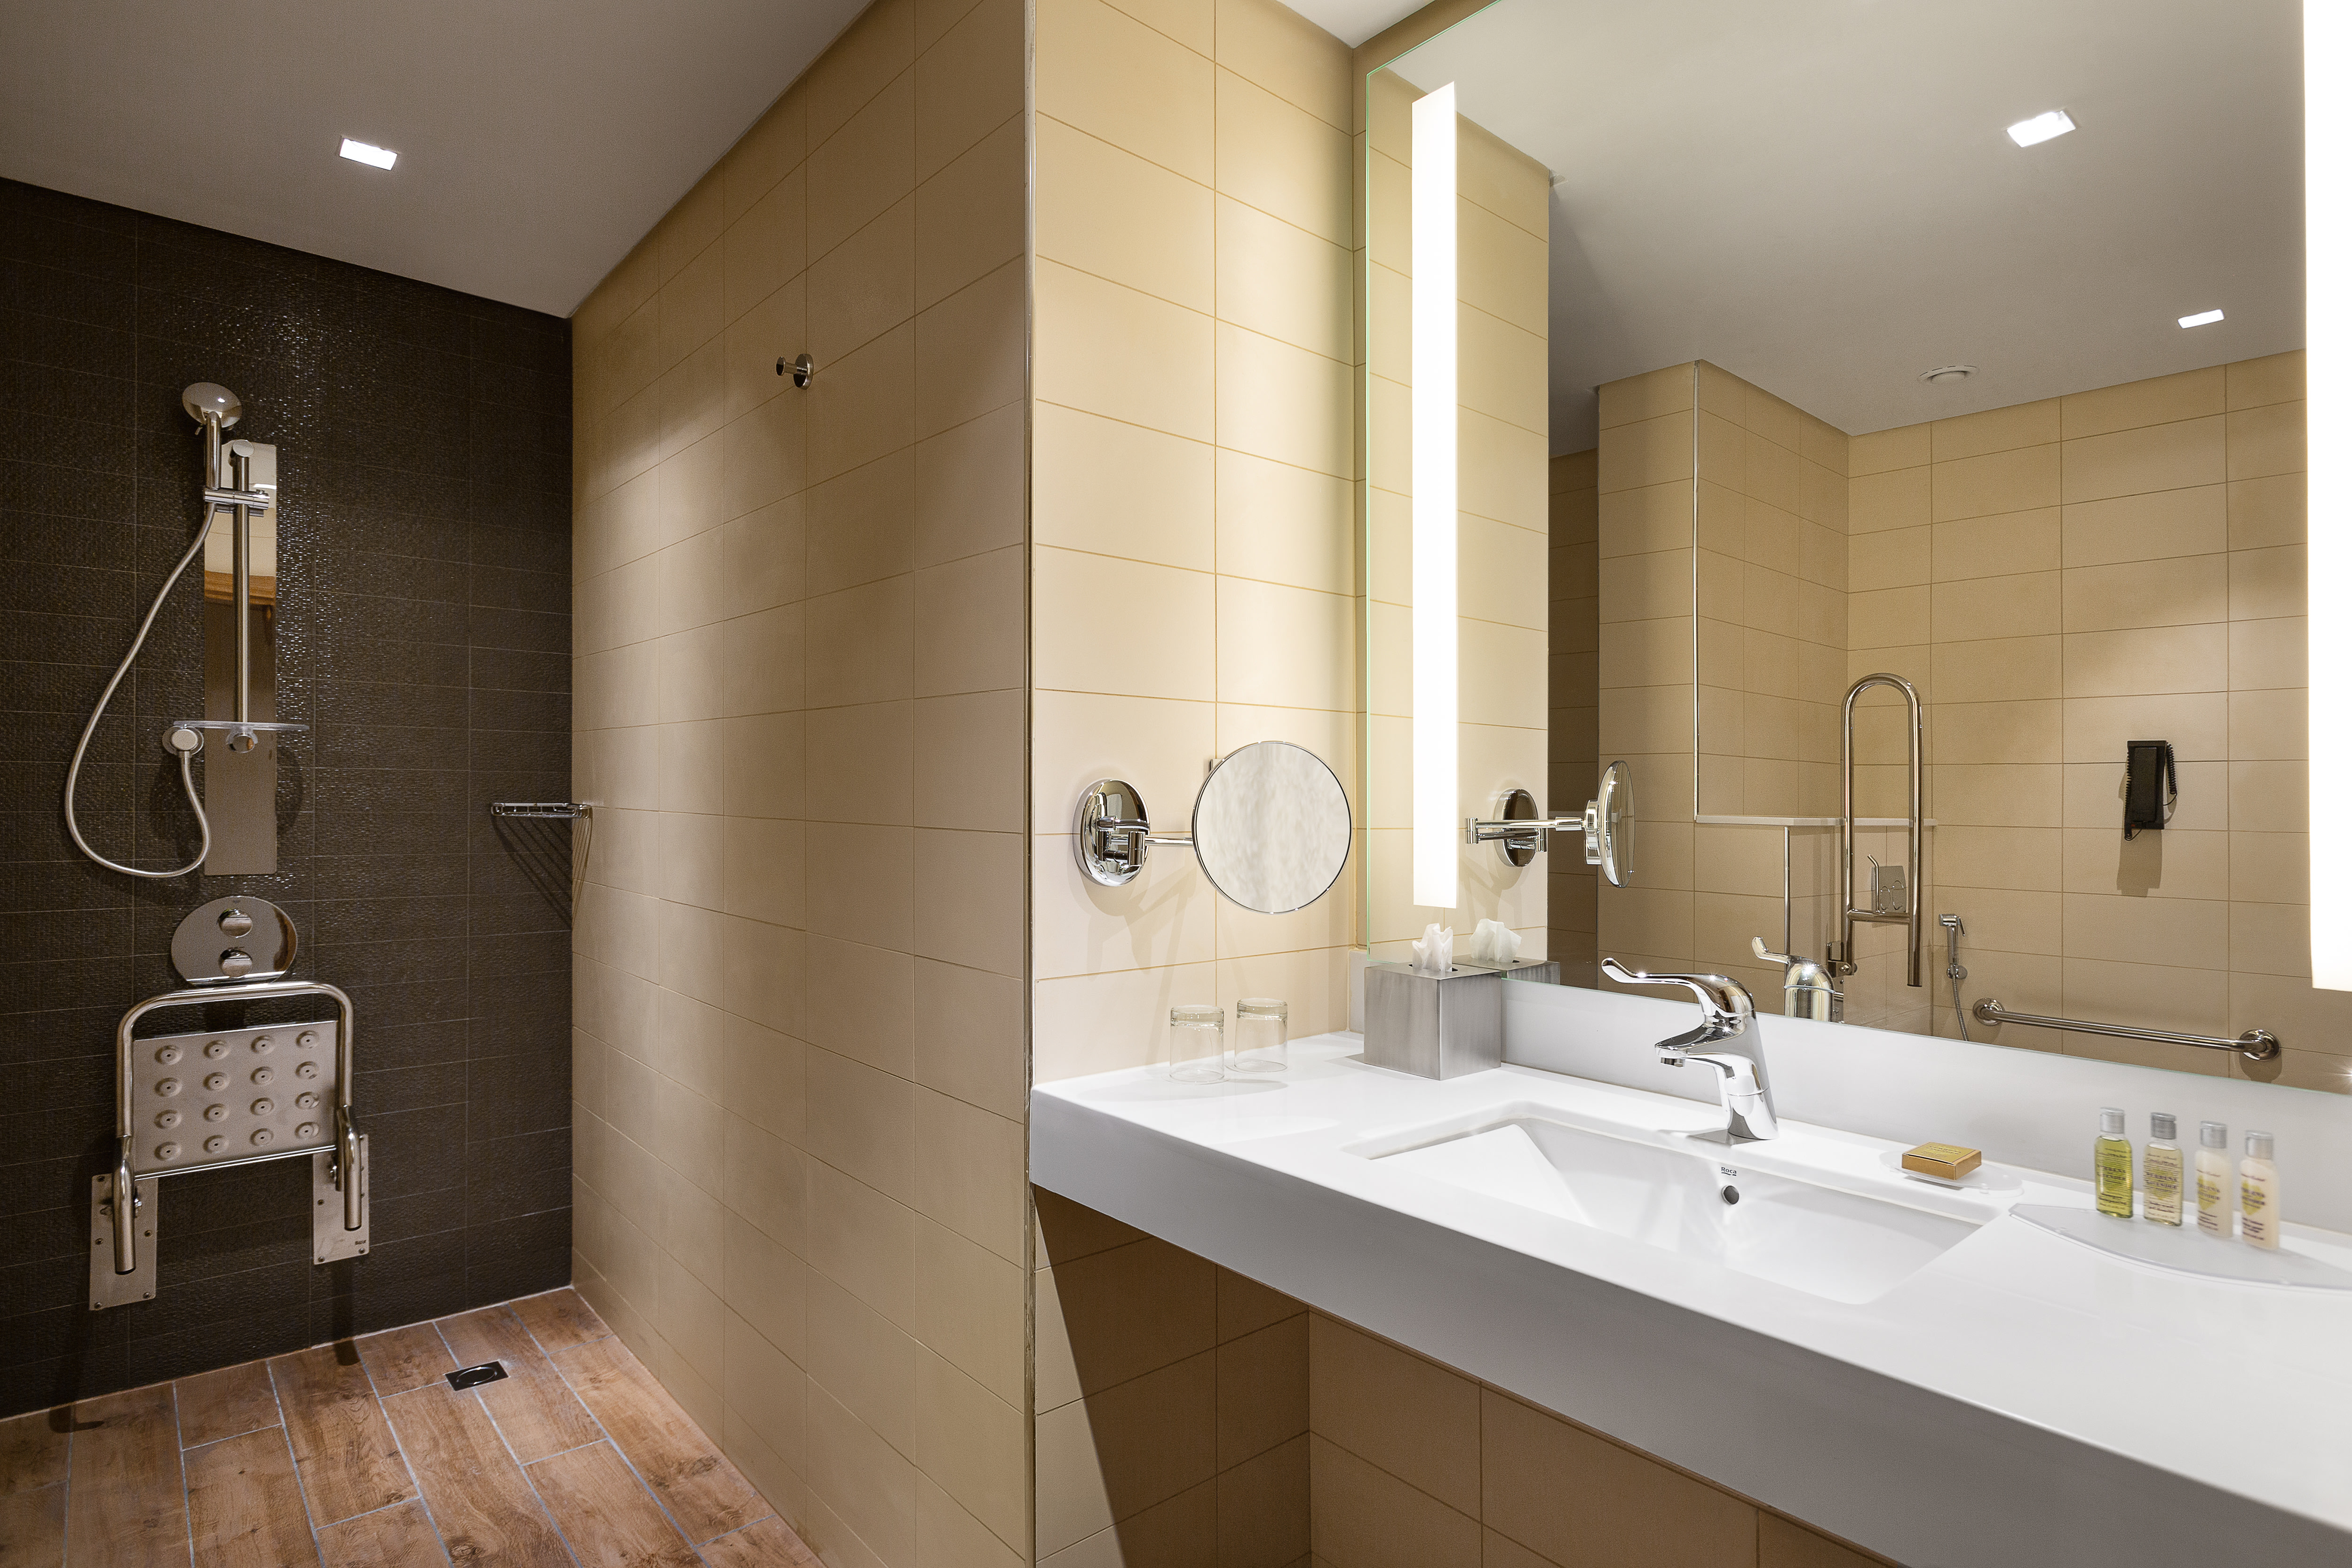 Accessible bathroom with roll-in shower and seat which can be stored away